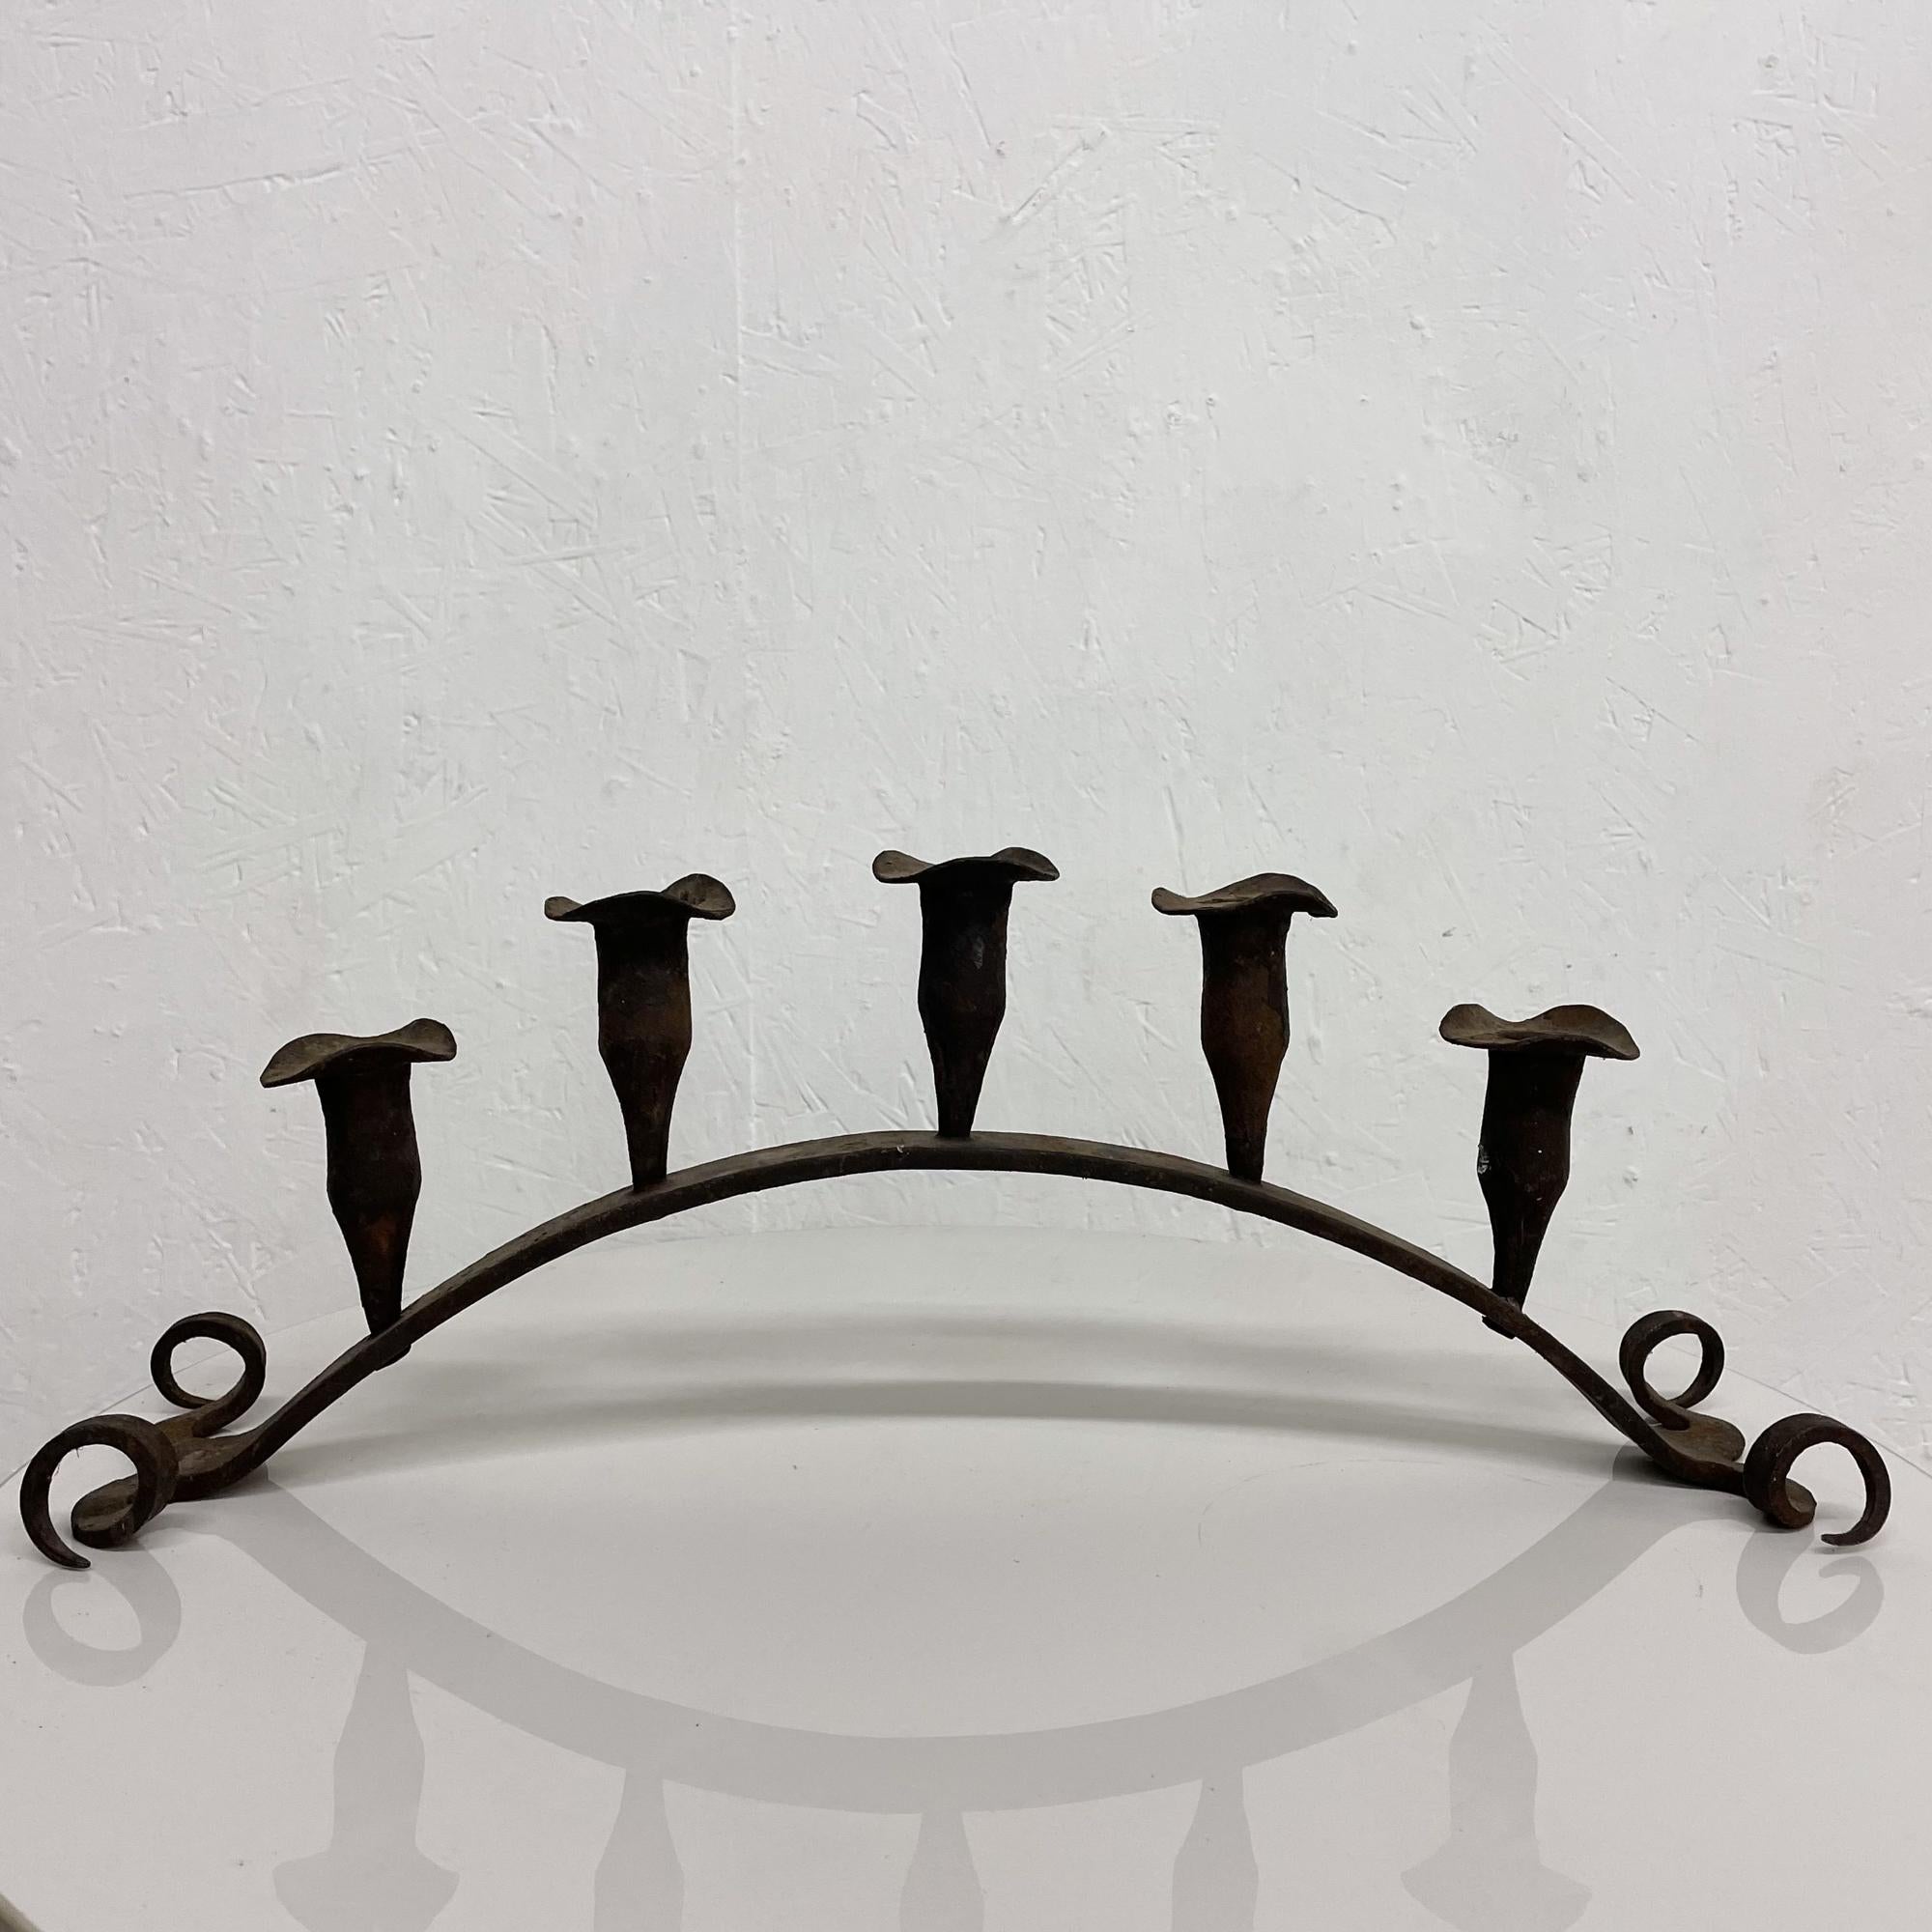 1940s Spanish Colonial Rustic Iron Scroll Five Arm Candle Holder  In Good Condition For Sale In Chula Vista, CA